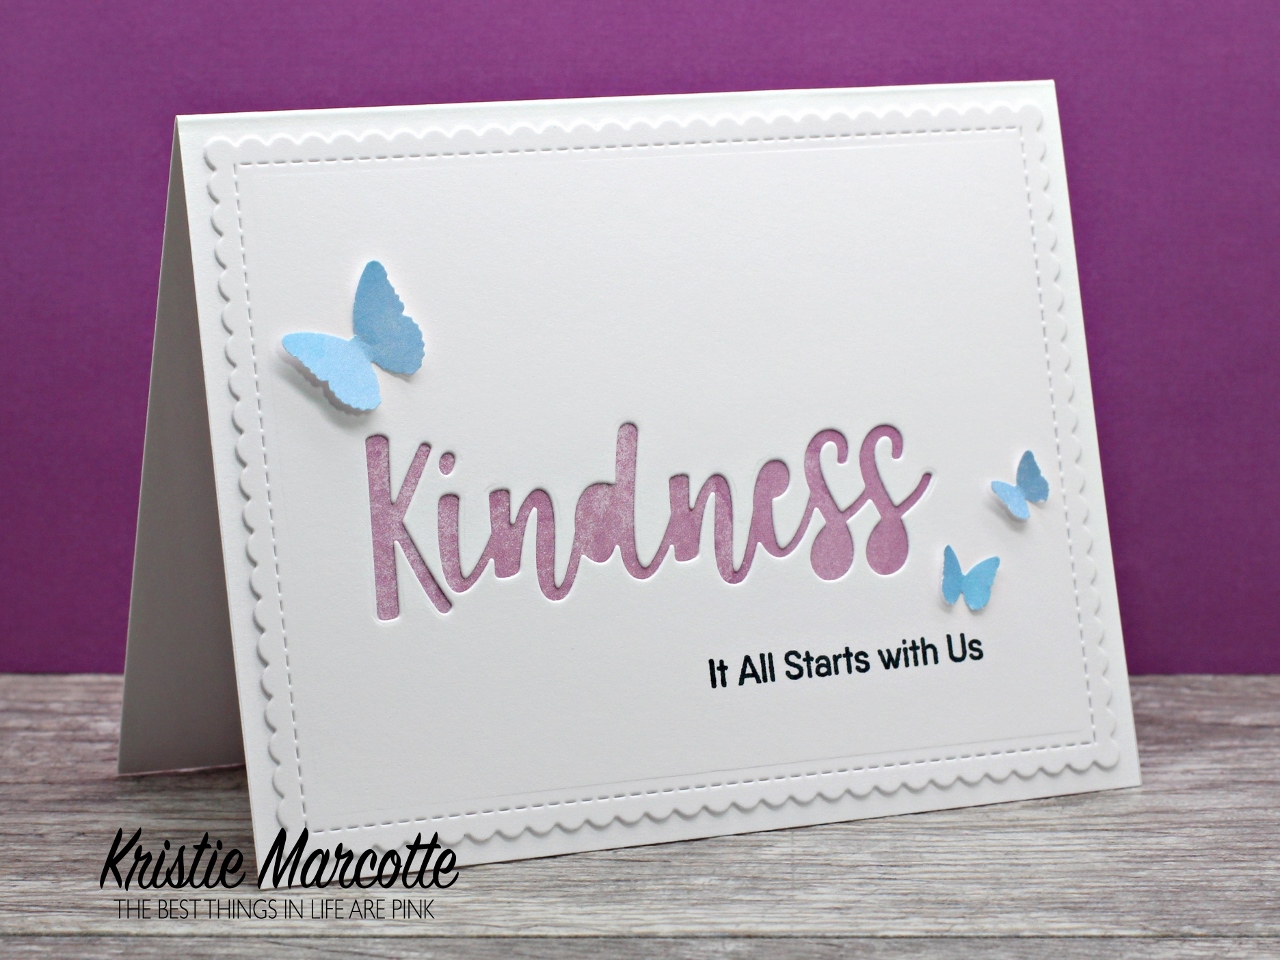 Kindness, It All Starts with Us